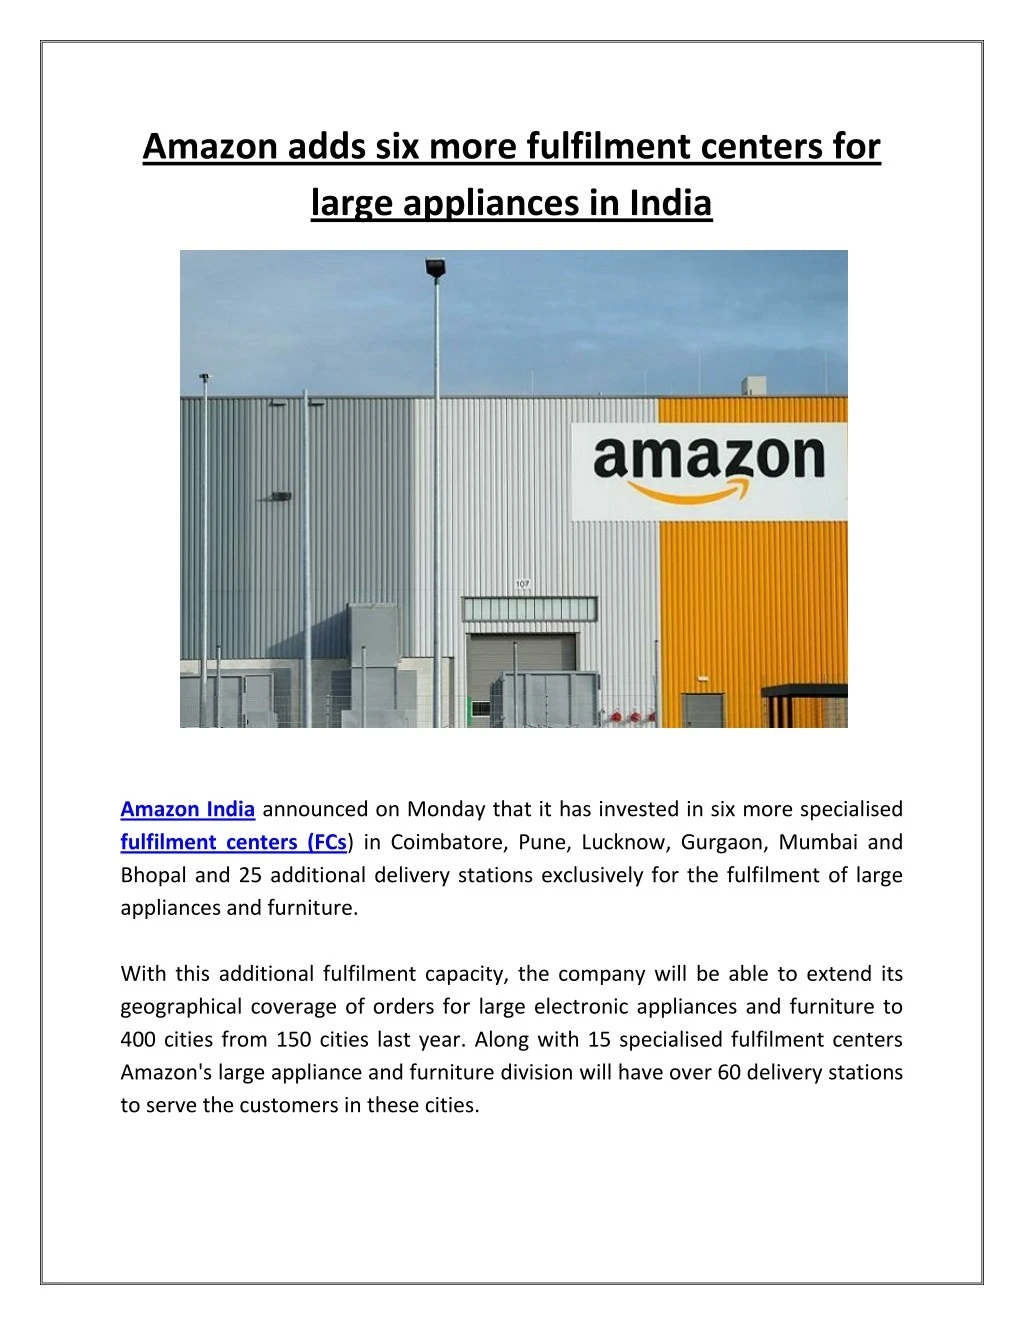 amazon adds six more fulfilment centers for large